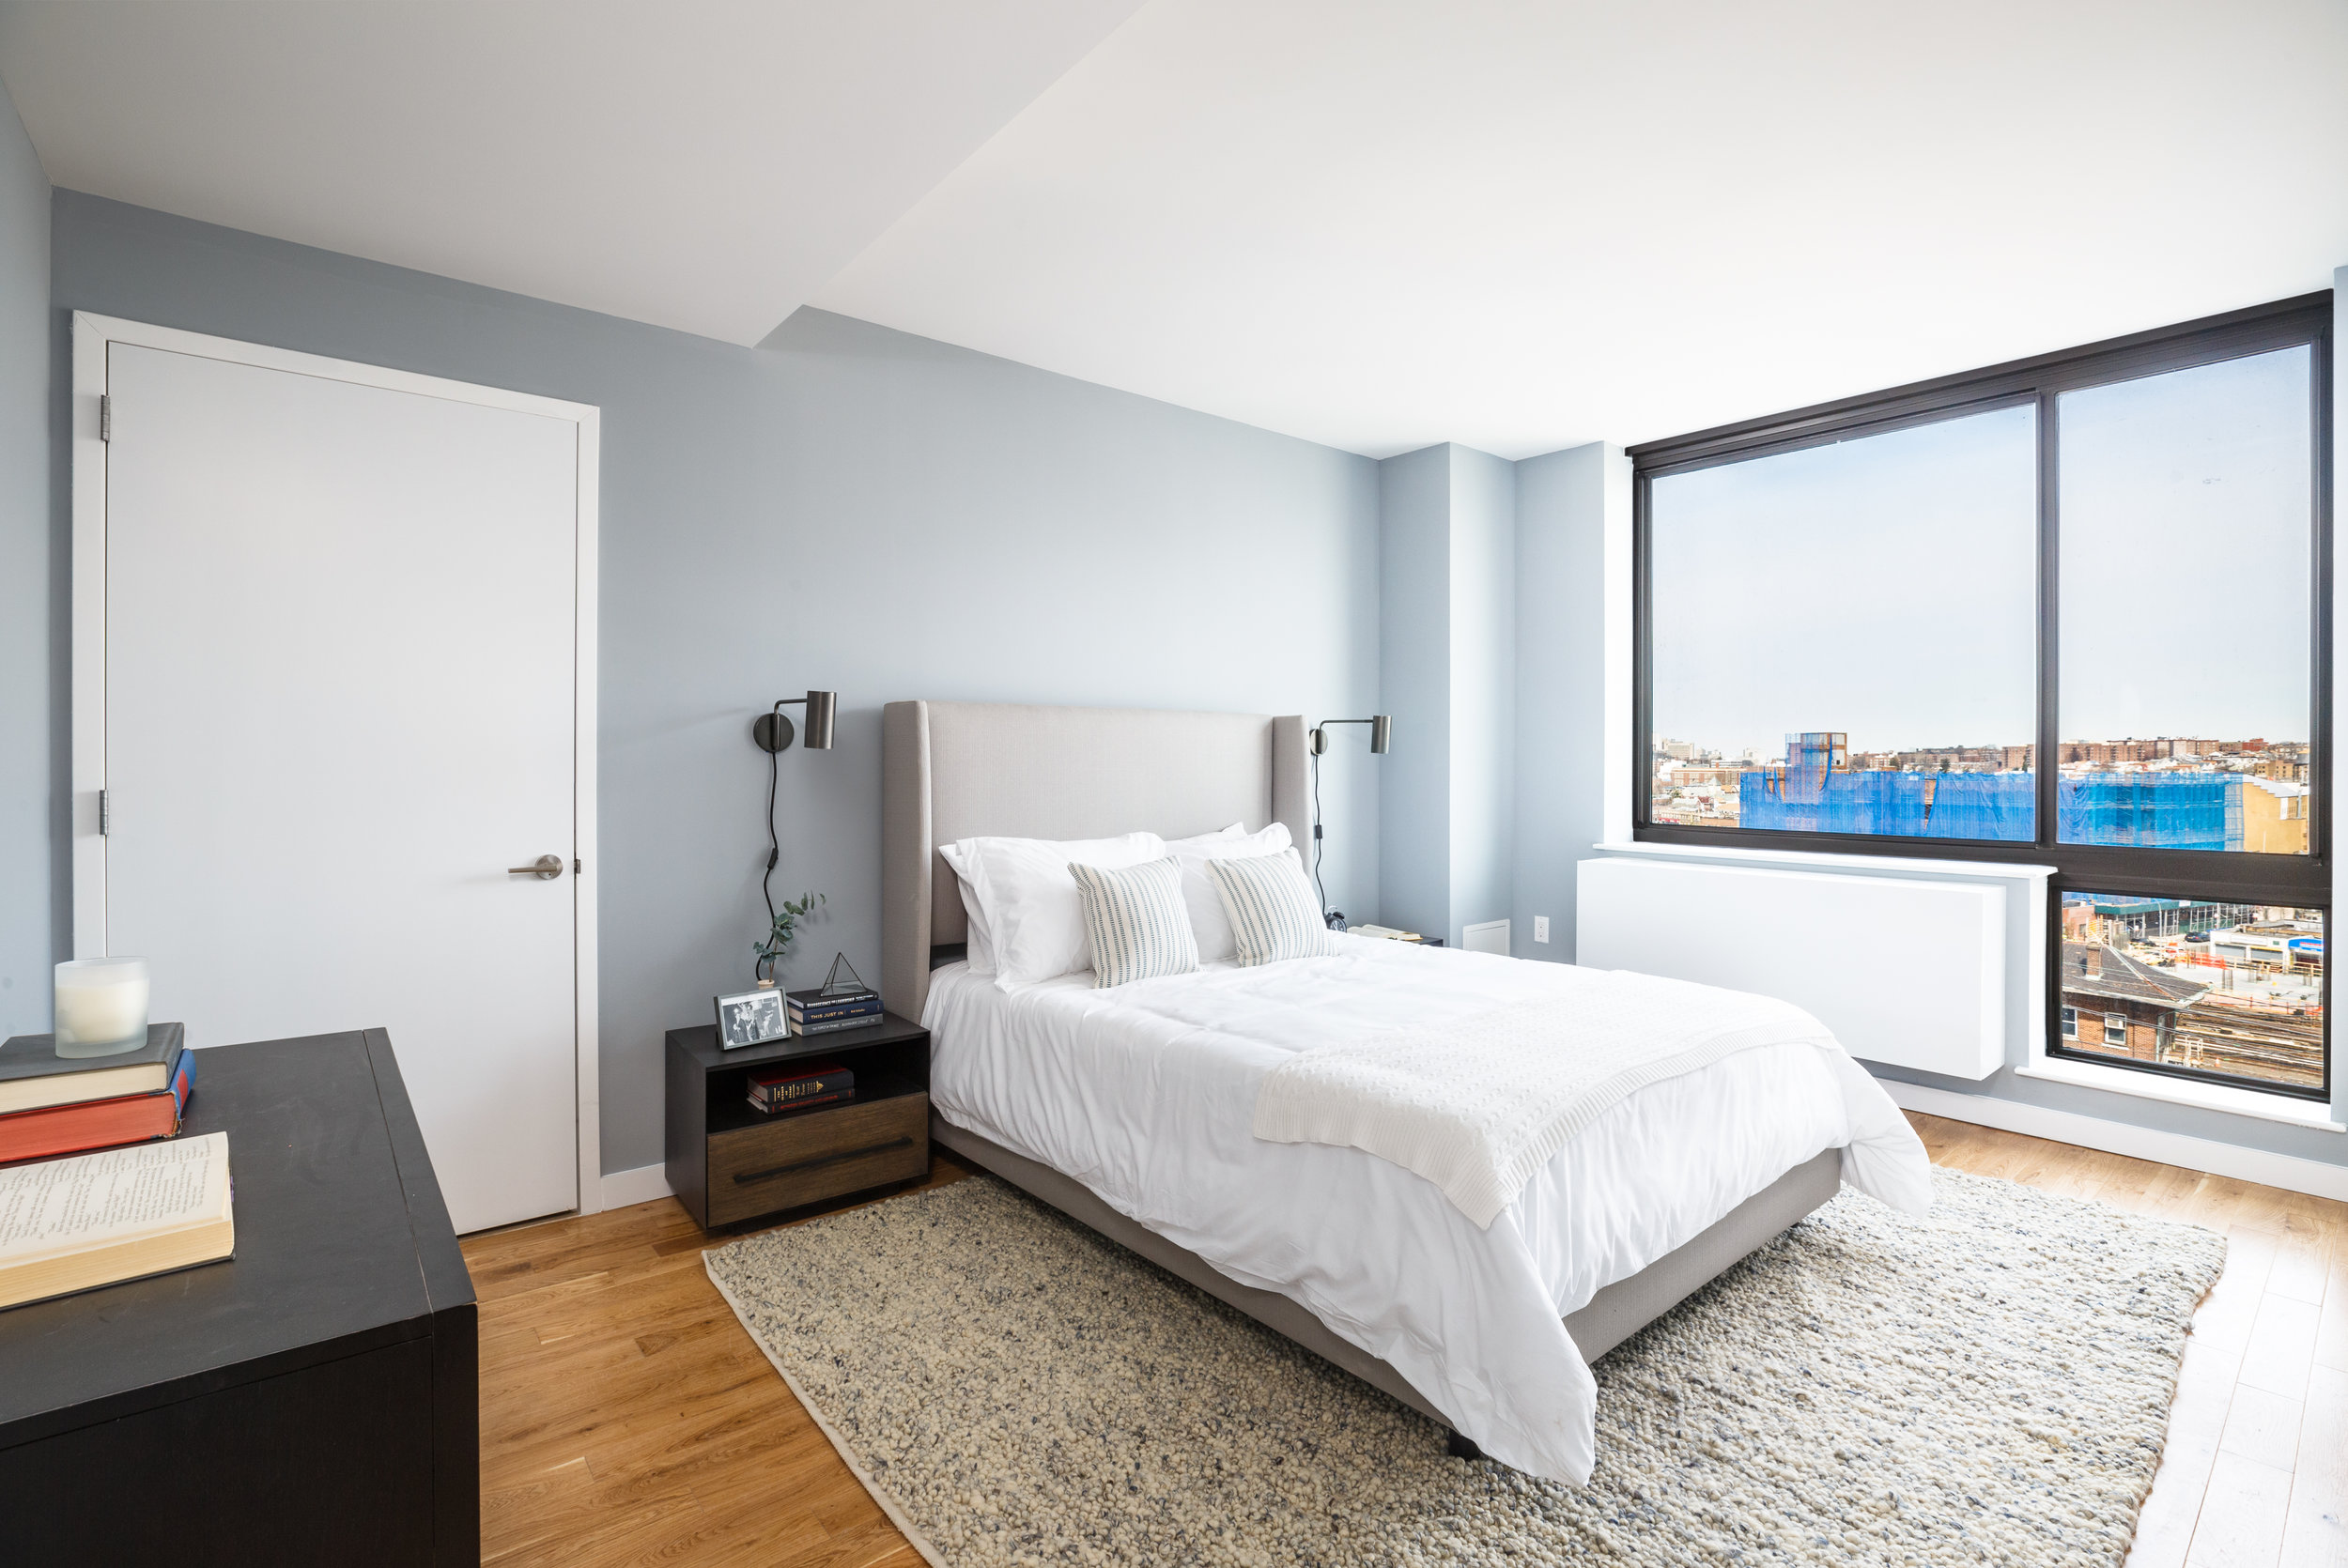 Alvista_-_2_Bedroom_Model_and_view_shots_of_Terrace_and_Recreation_Space_HighRes-2.jpg